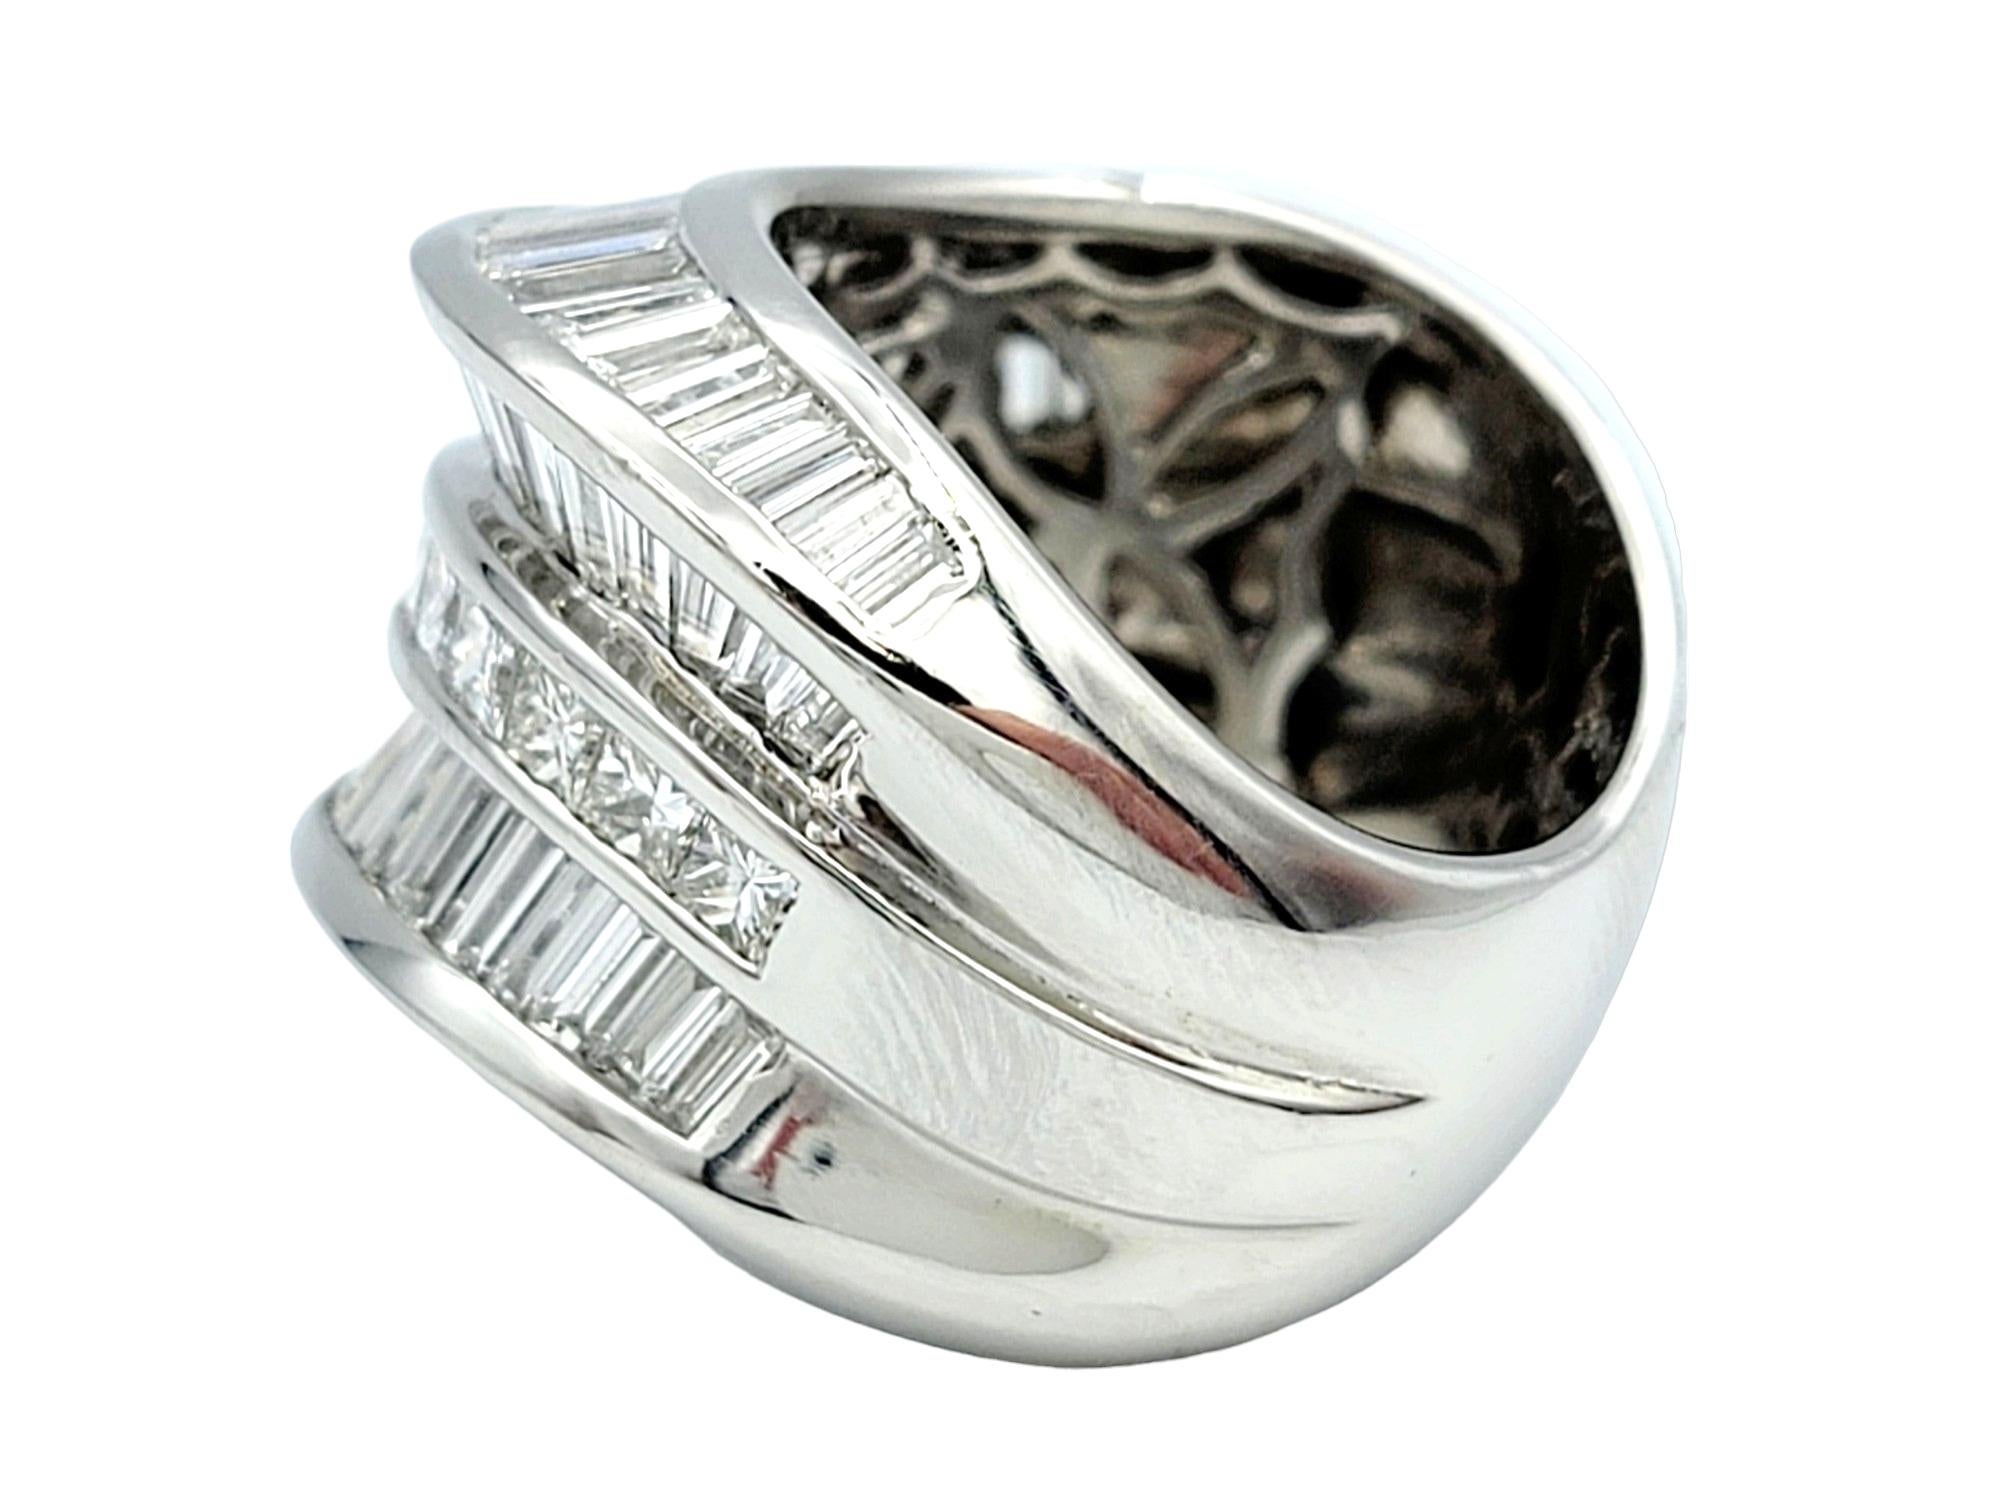 Ring Size: 6.5

This gorgeous wide band ring, with its unique combination of baguette and princess cut diamonds, is a striking work of art. The use of polished platinum ensures not only a luxurious appearance but also durability and longevity. The